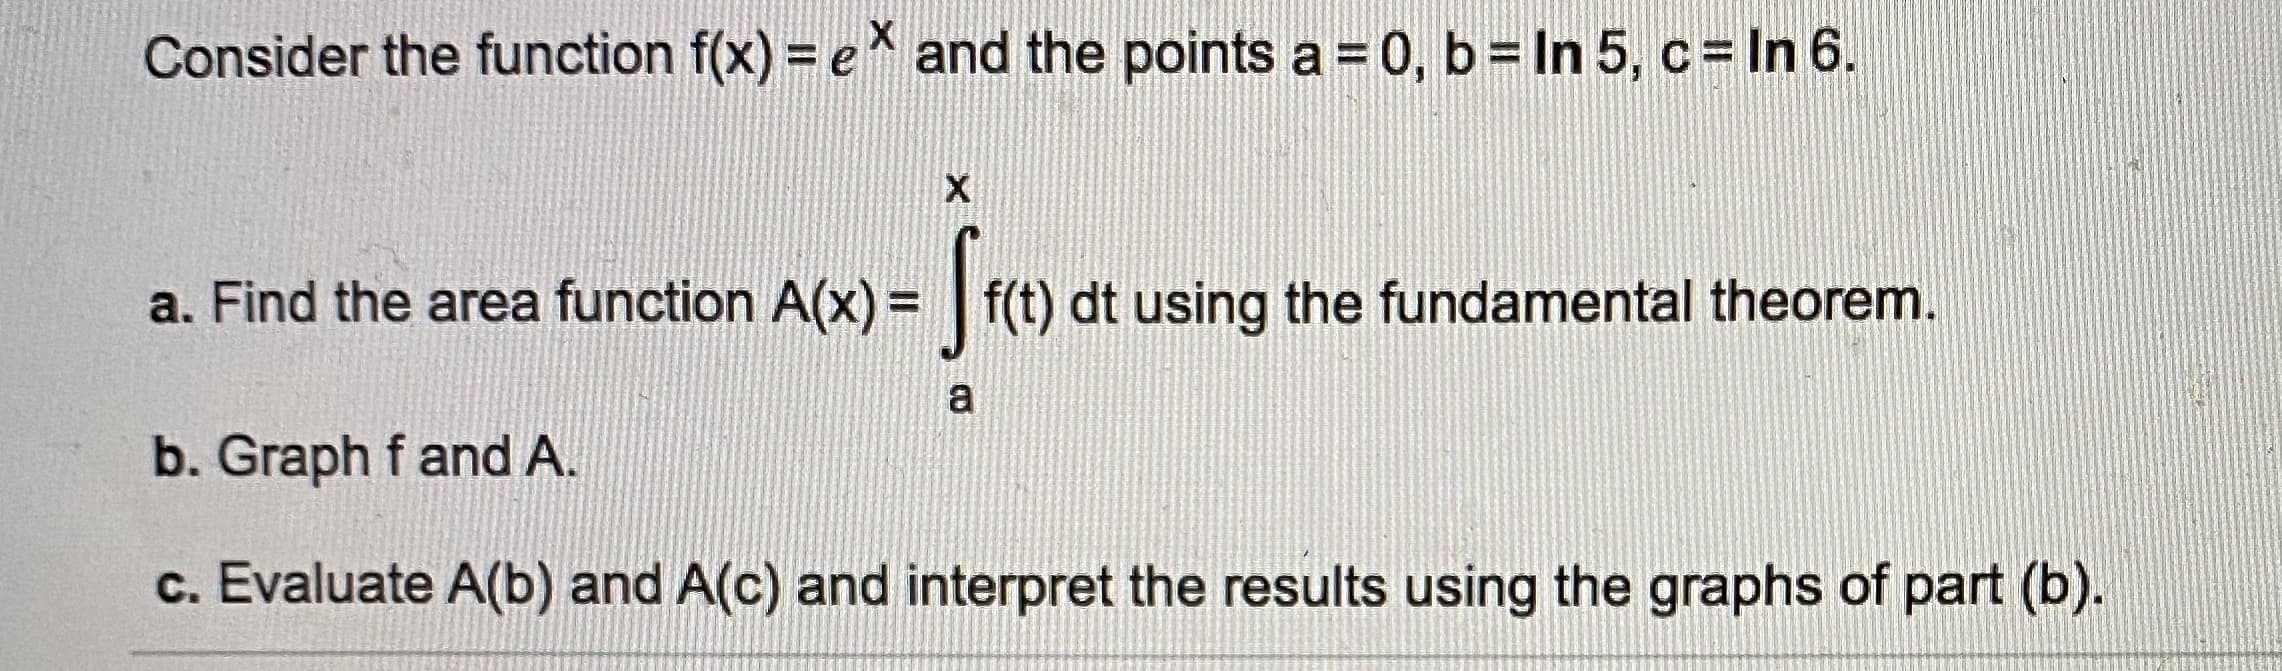 Consider the function f(x) = e and the points a=0, b= In 5, c = In 6.
a. Find the area function A(x) = |f(t) dt using the fundamental theorem.
%3D
b. Graph f and A.
c. Evaluate A(b) and A(c) and interpret the results using the graphs of part (b).
